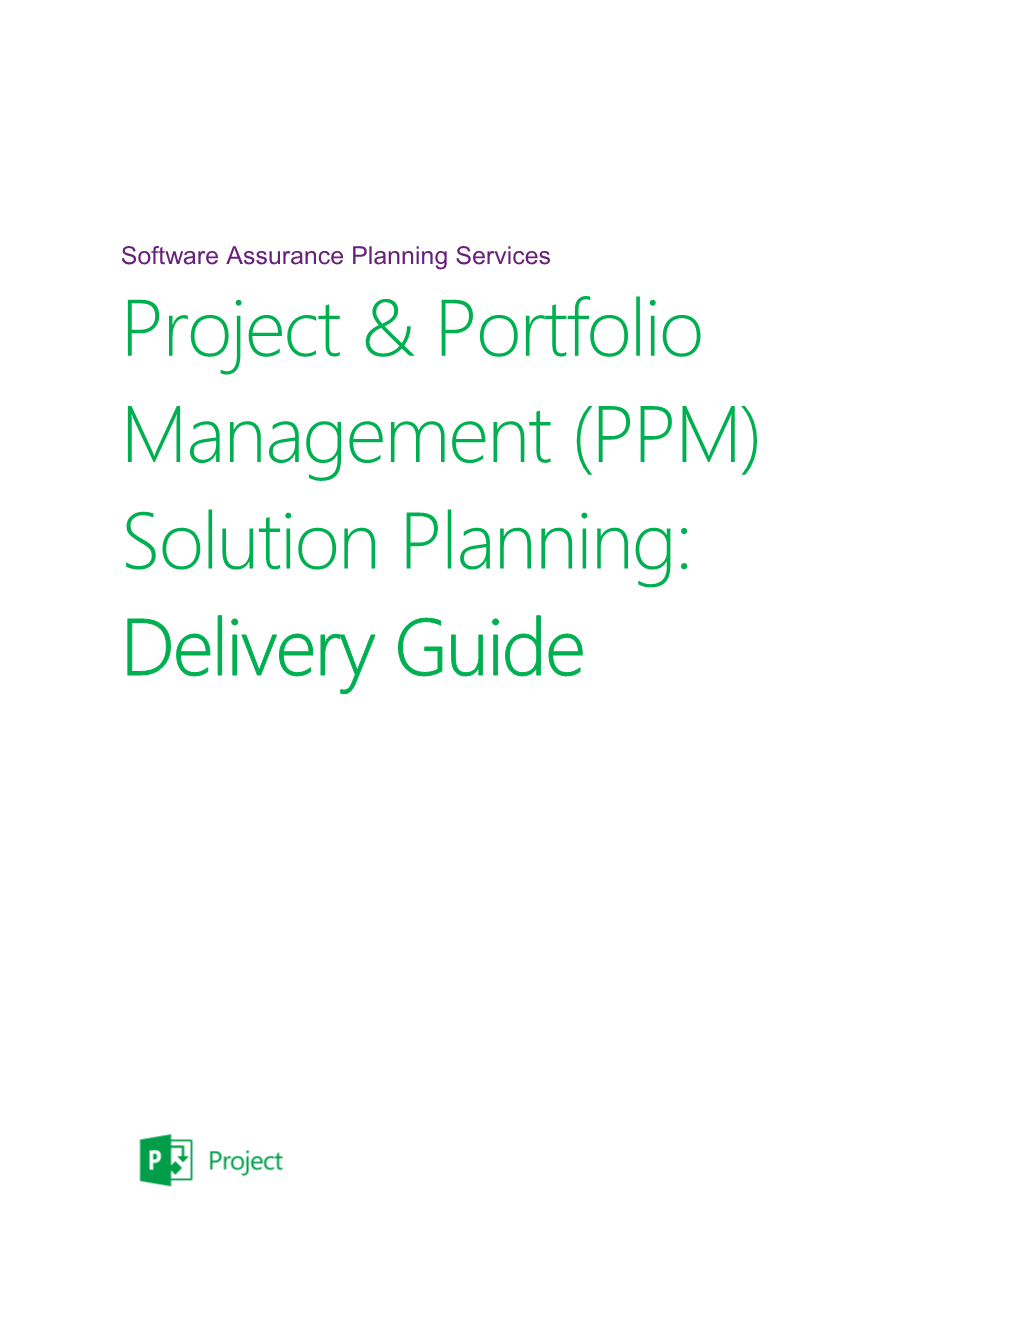 PPM Solution Planning - Delivery Guide